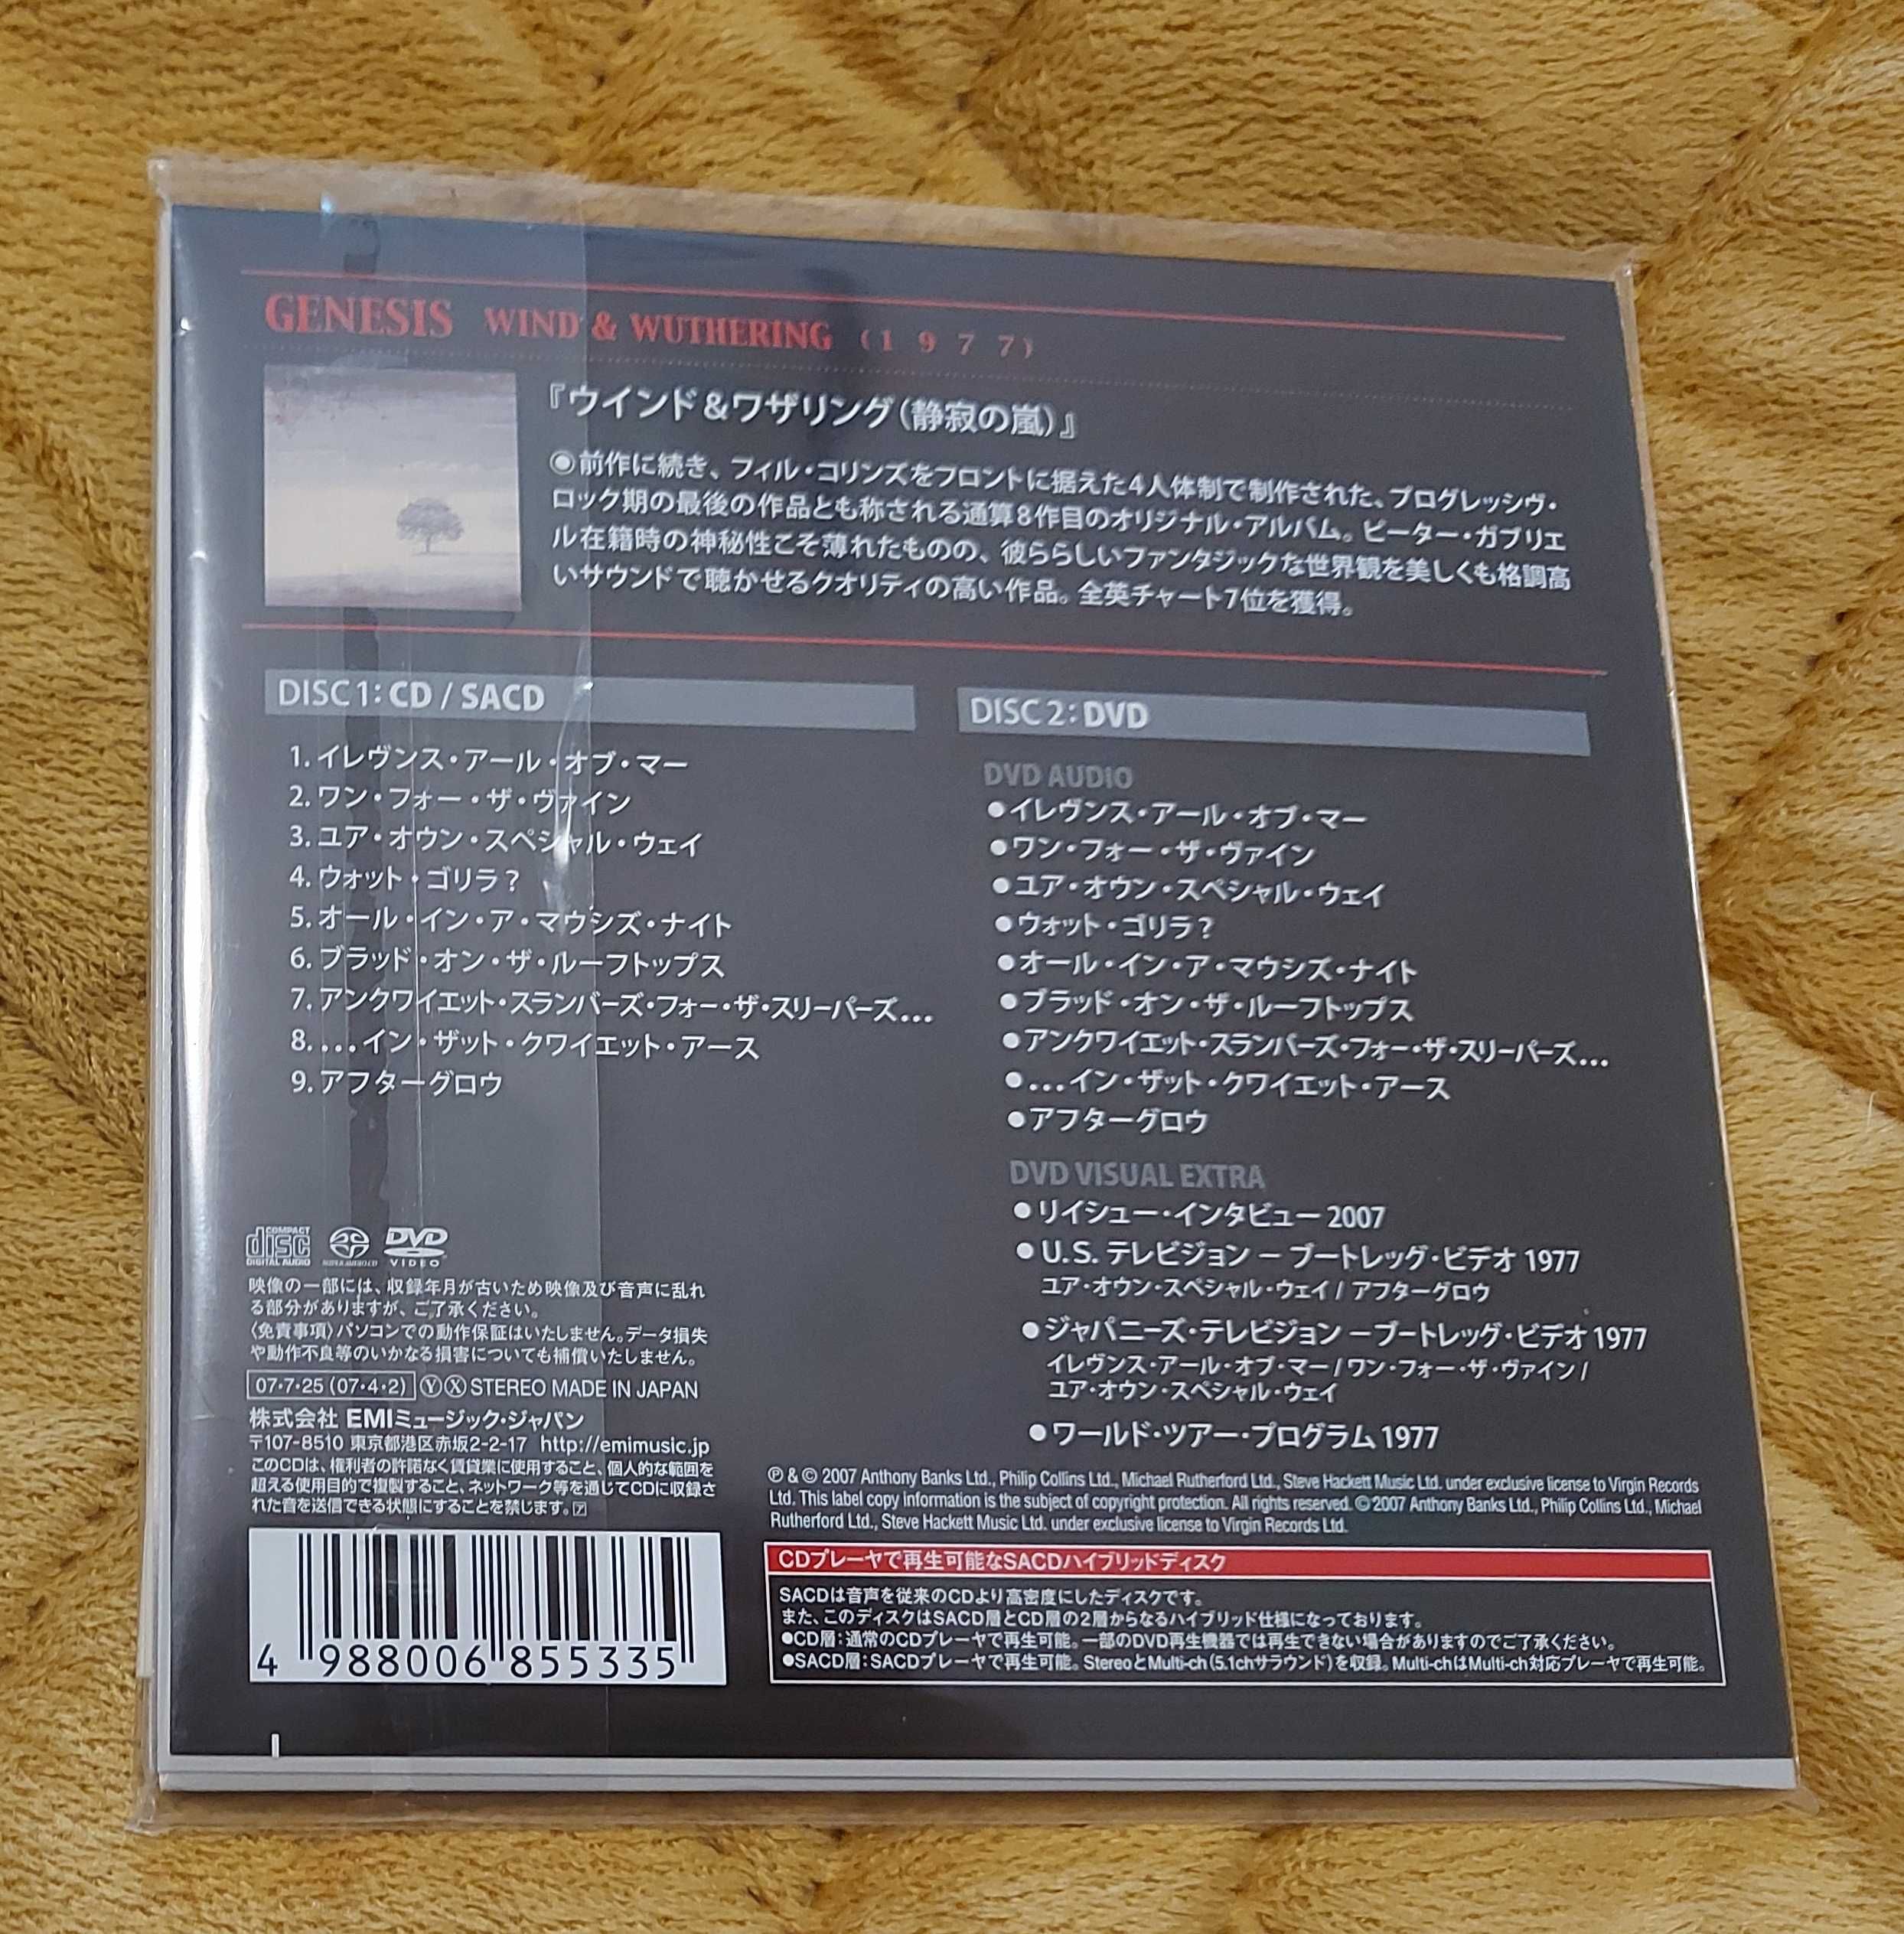 Genesis Wind And Wuthering Japan Deluxe CD SACD DVD